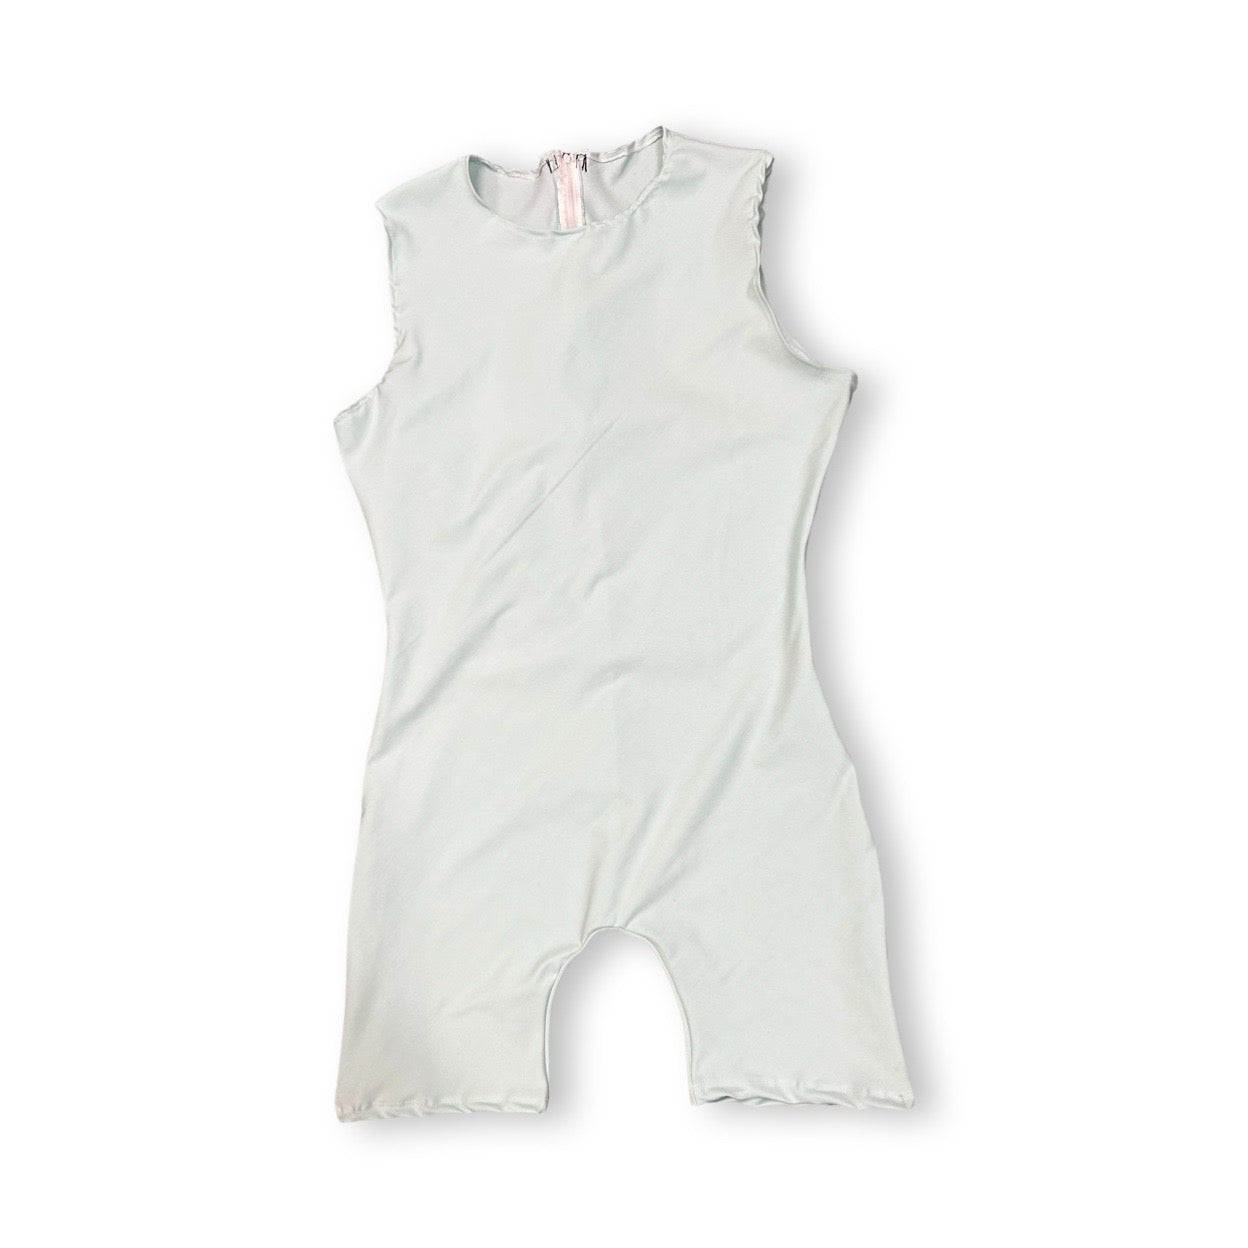 Baby's white swimsuit with pink trim, labeled Anti Strip Bodysuit Ultimate Protection